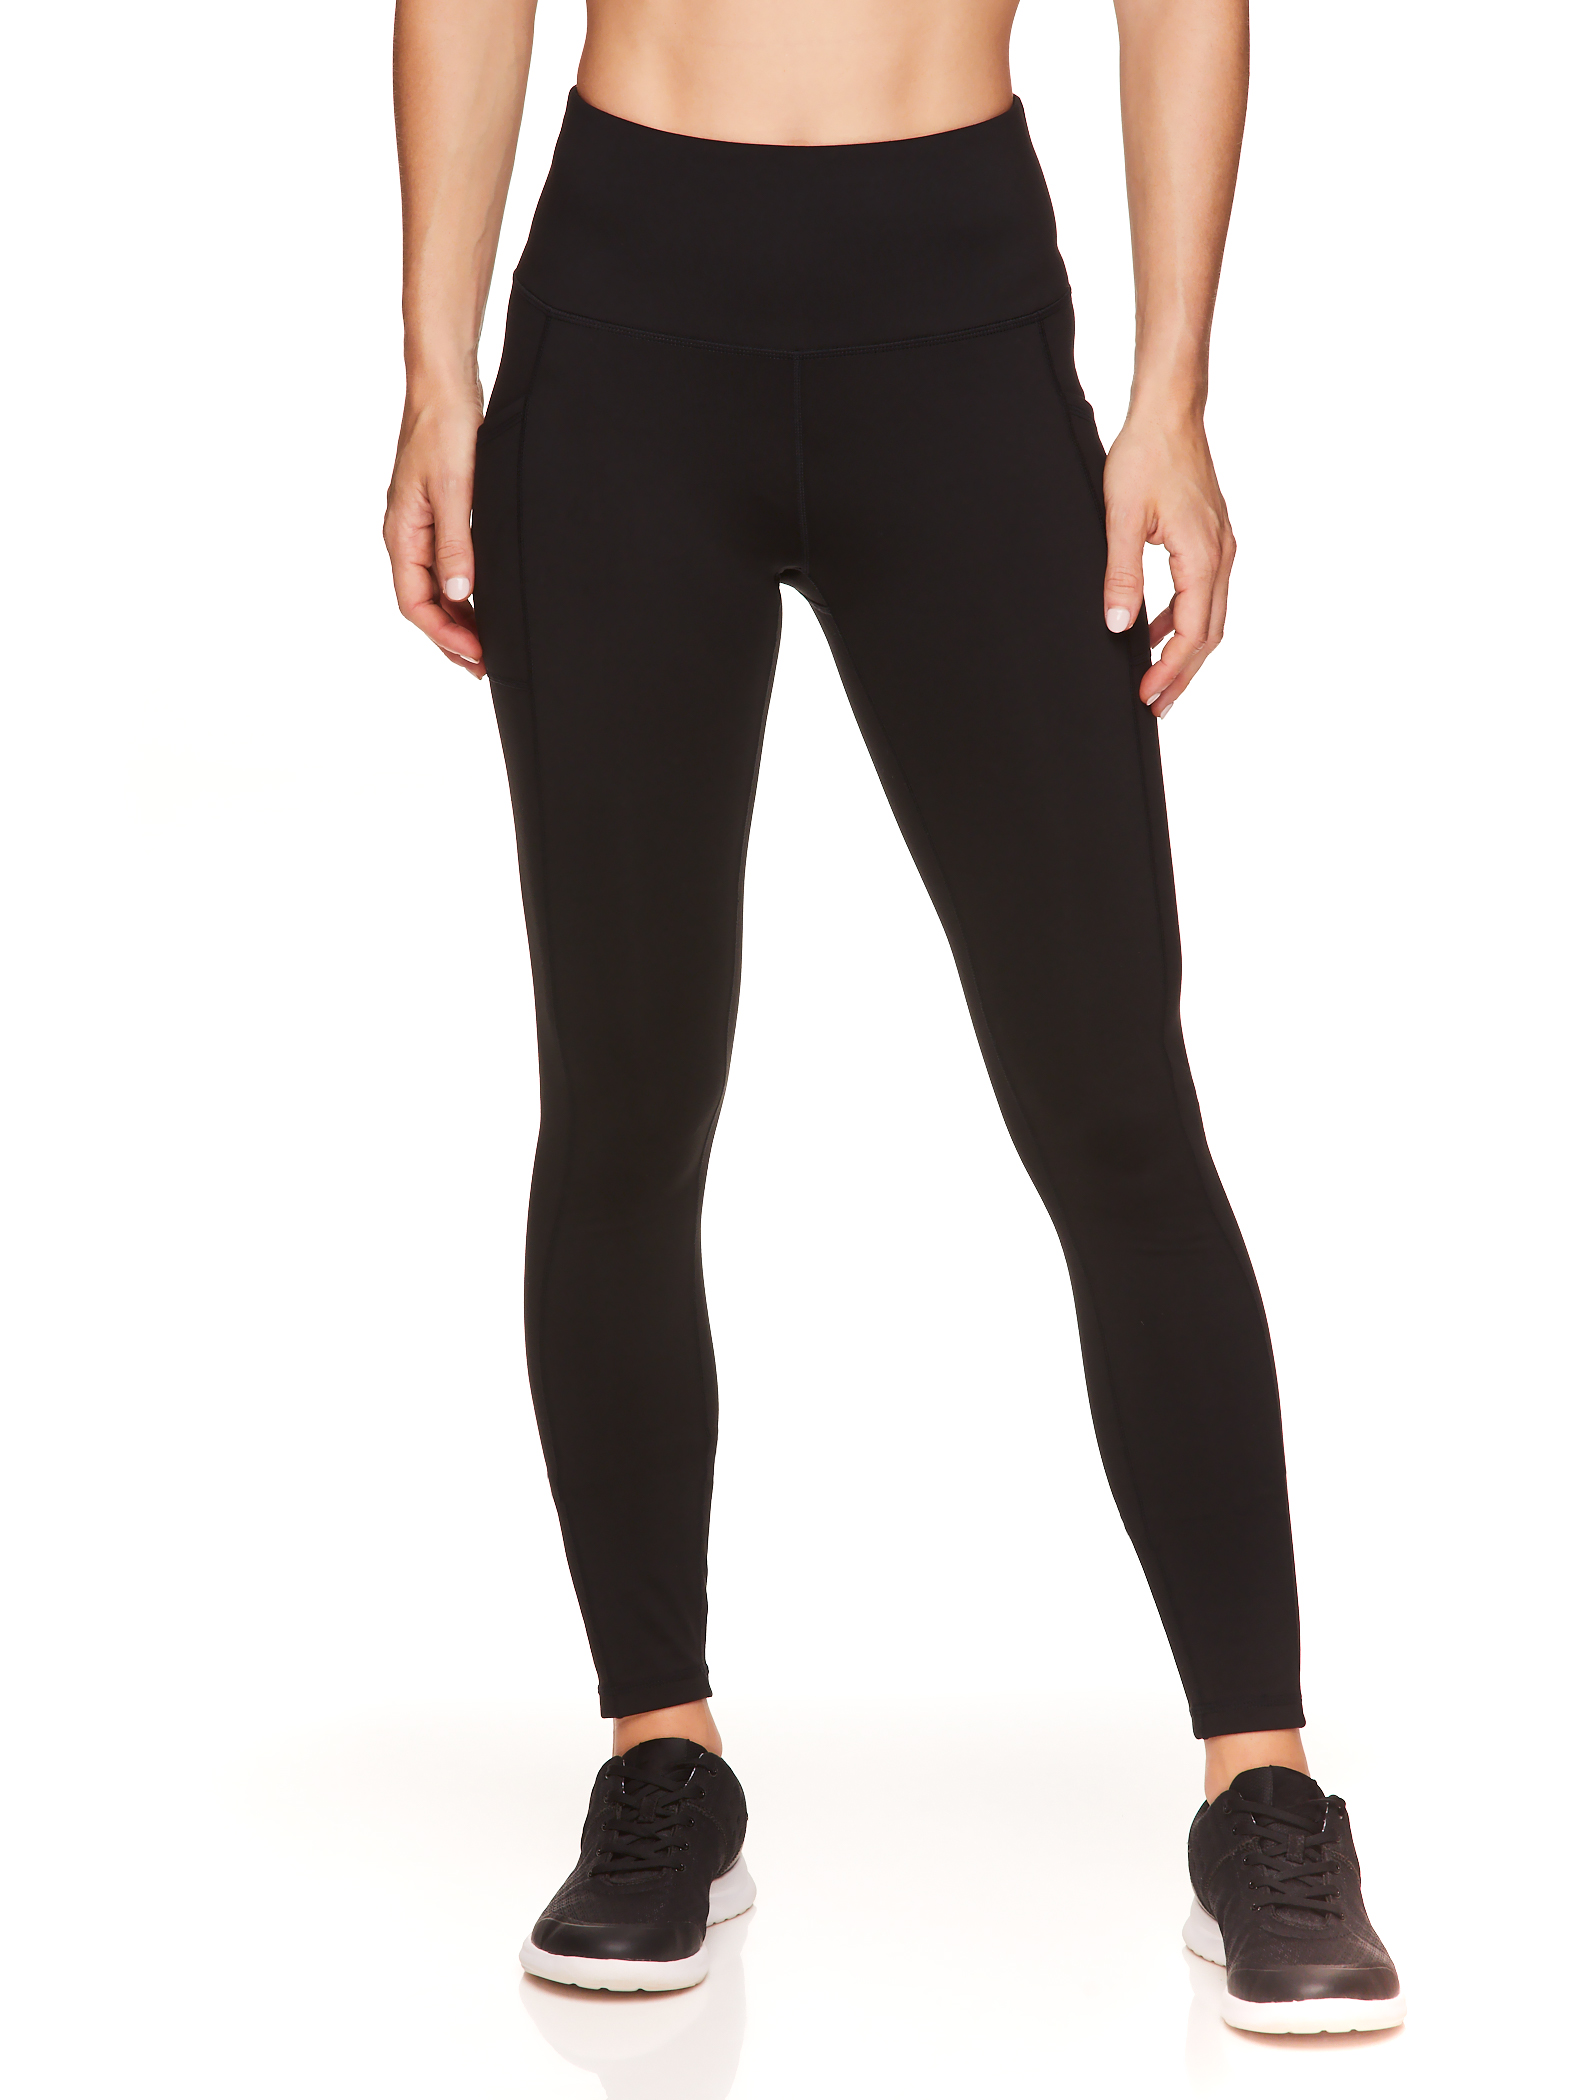 Reebok Women's Everyday High-Waisted Active Leggings with Pockets, 28" Inseam - image 1 of 4